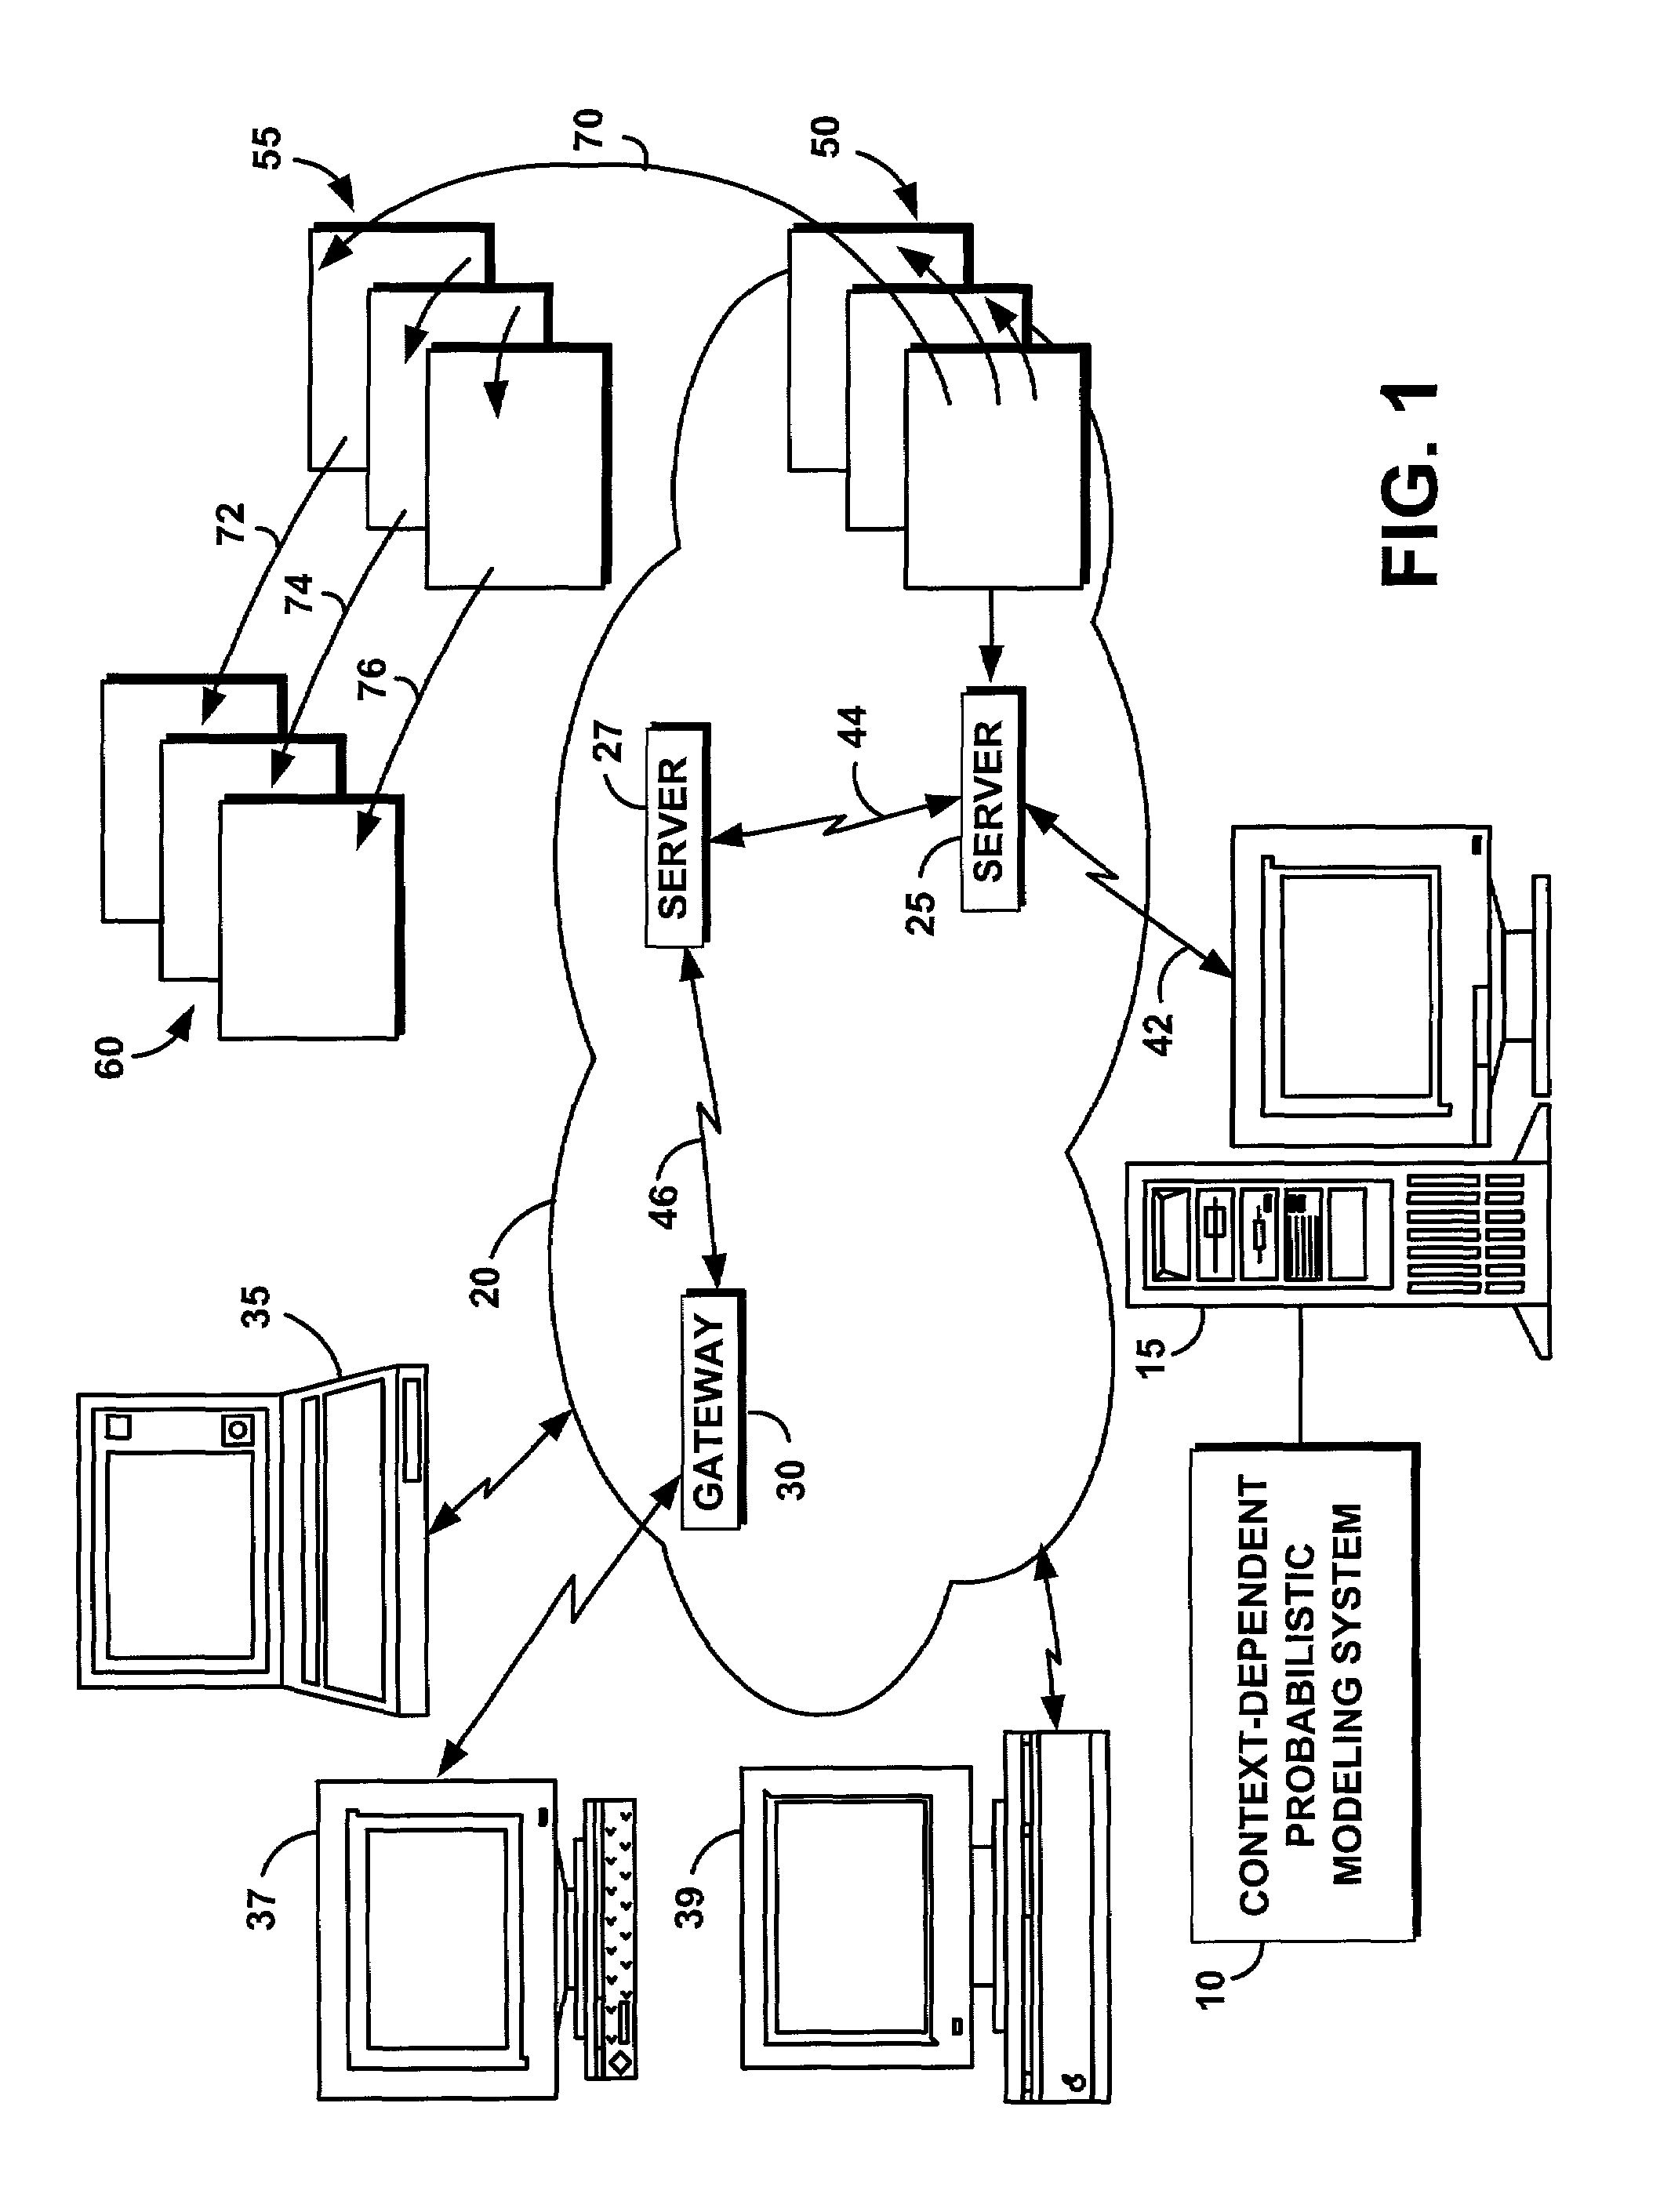 System and method of finding documents related to other documents and of finding related words in response to a query to refine a search